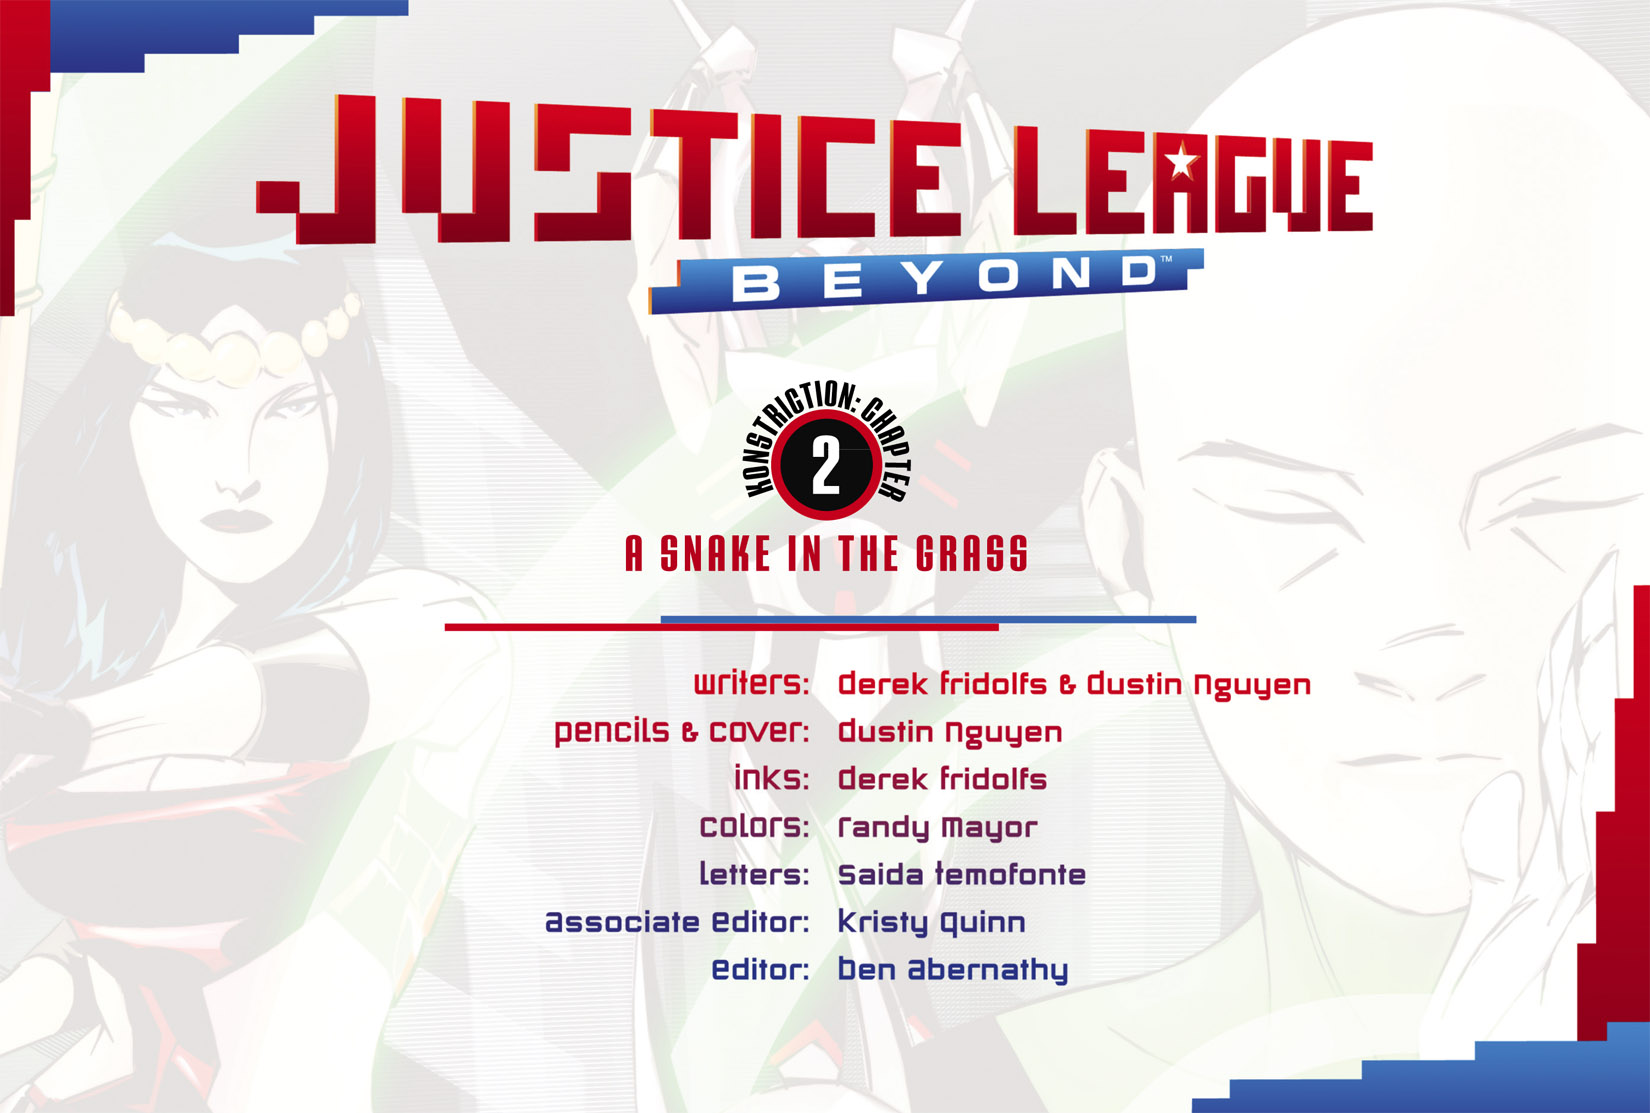 Read online Justice League Beyond comic -  Issue #2 - 2